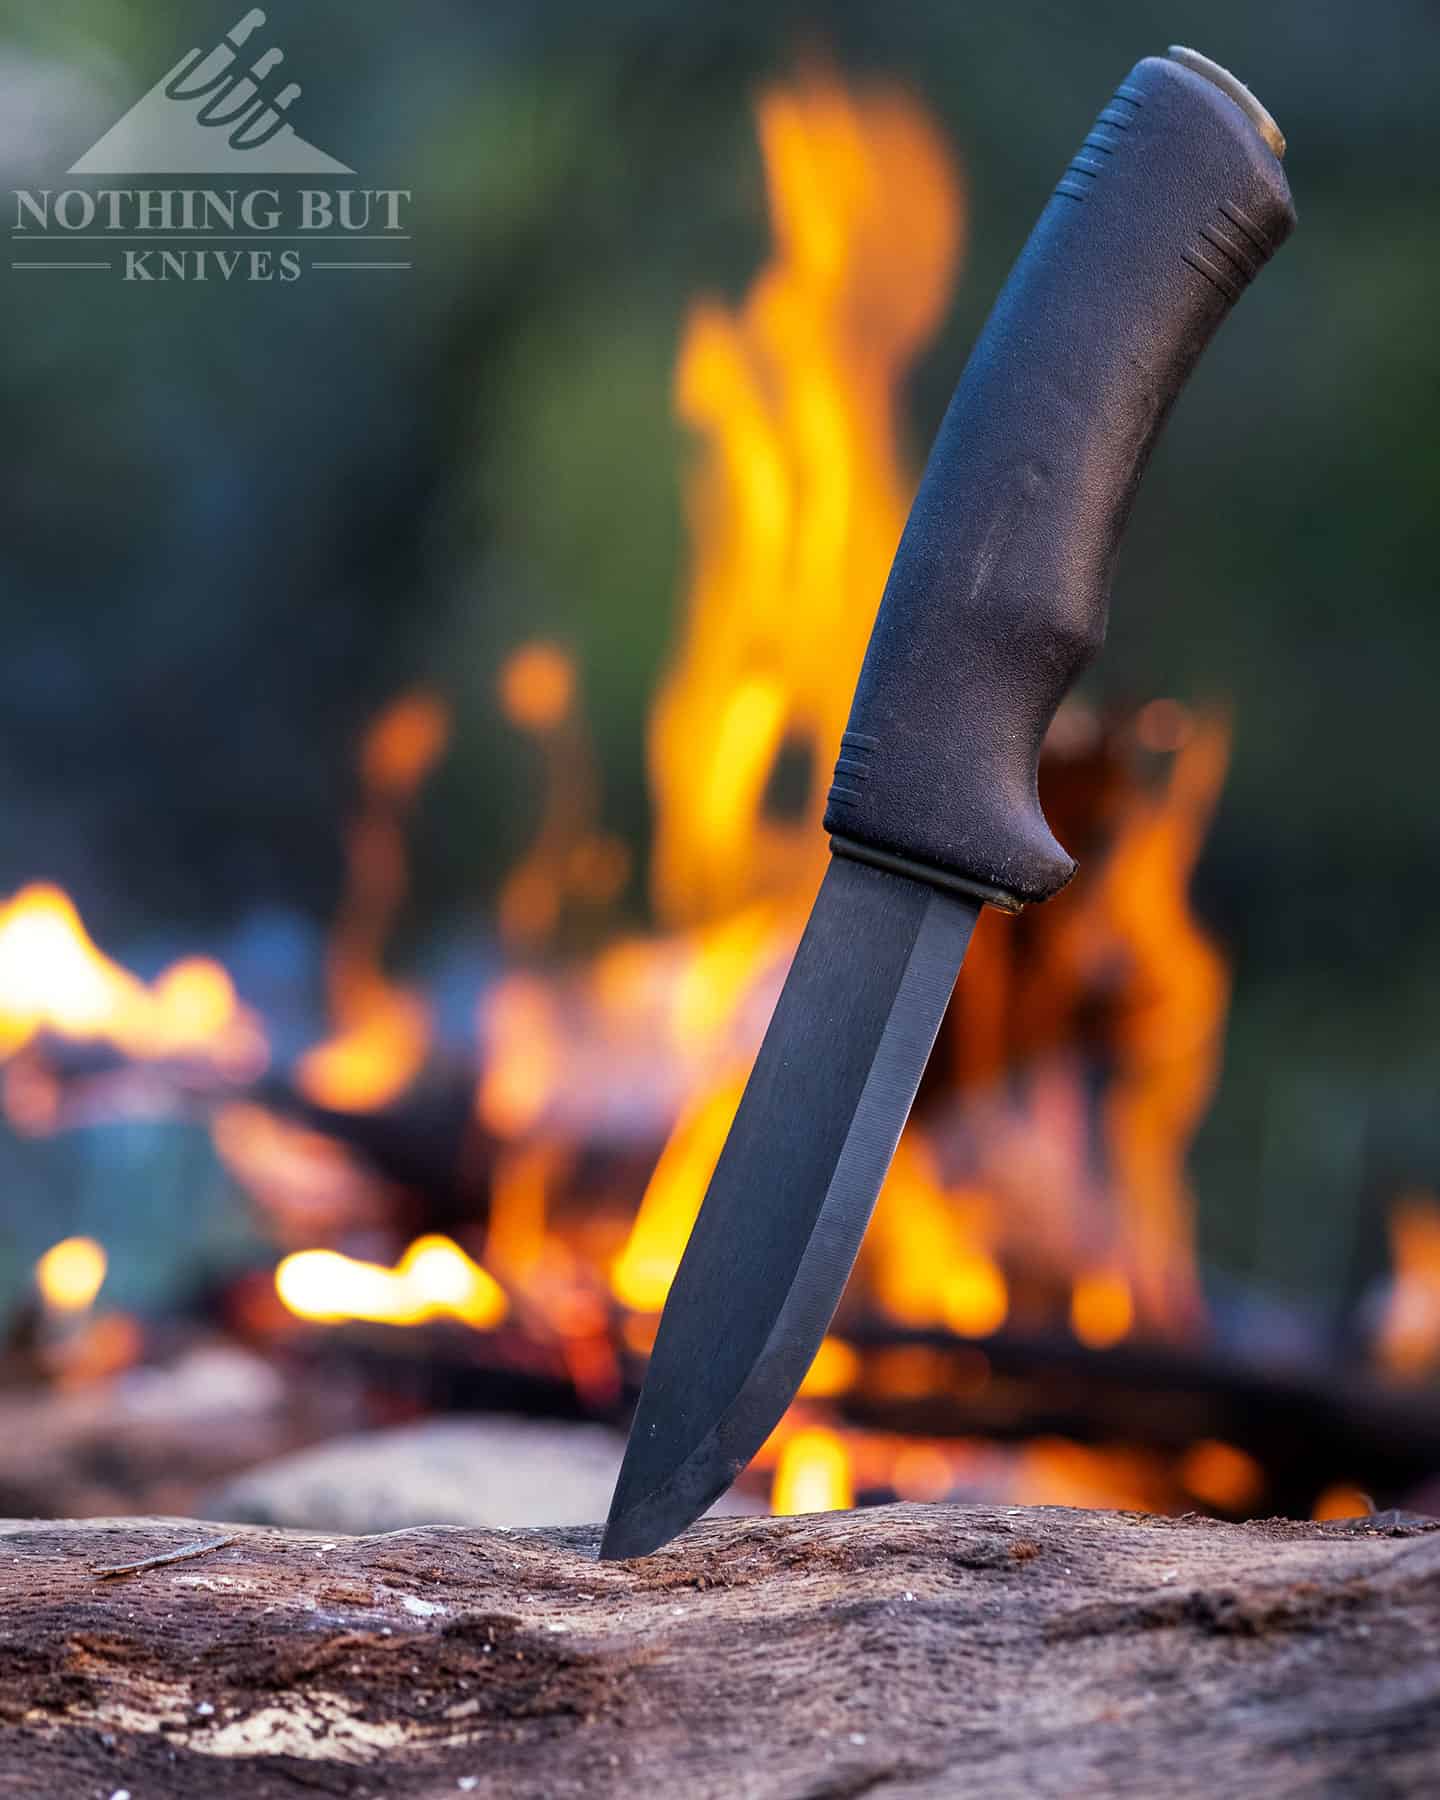 The Mora Bushcraft Black is a classic survival knife with an affordable price. 